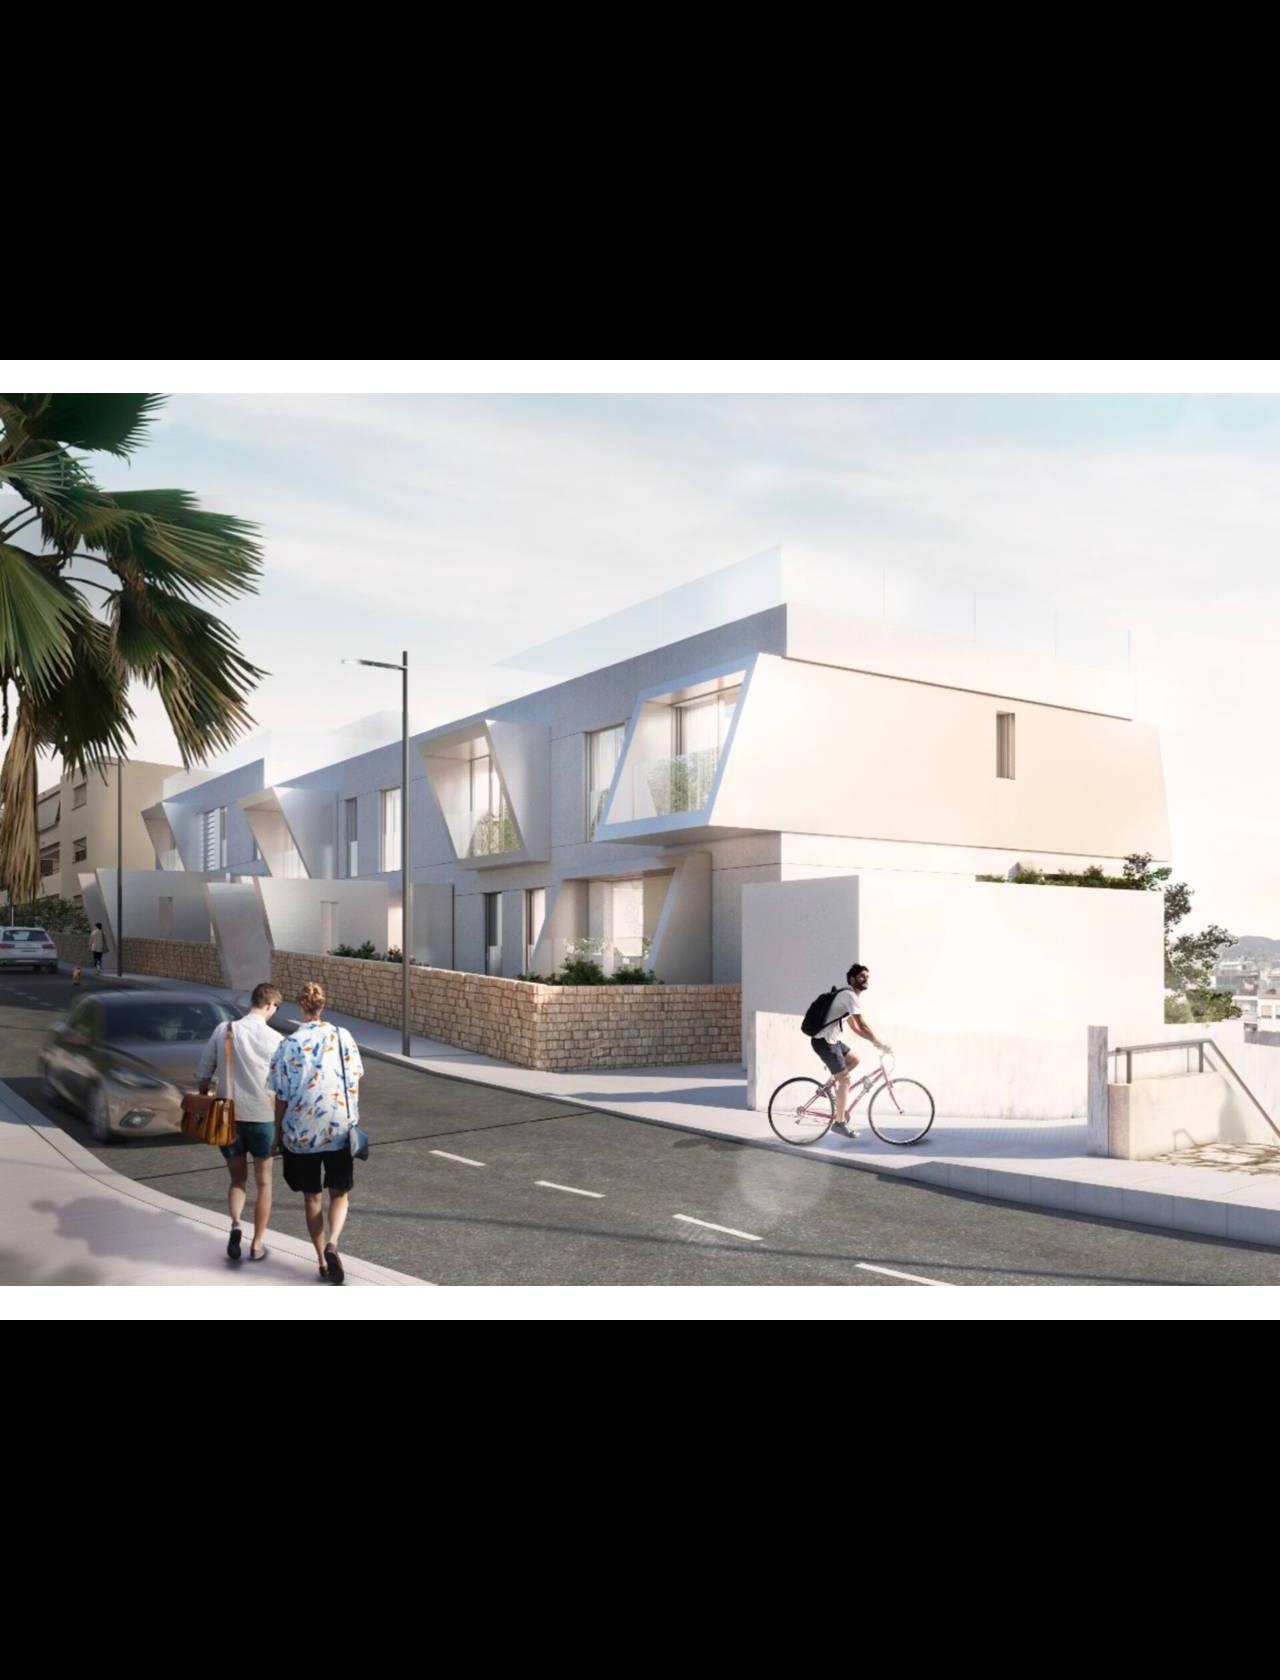 New construction in the center of Ibiza